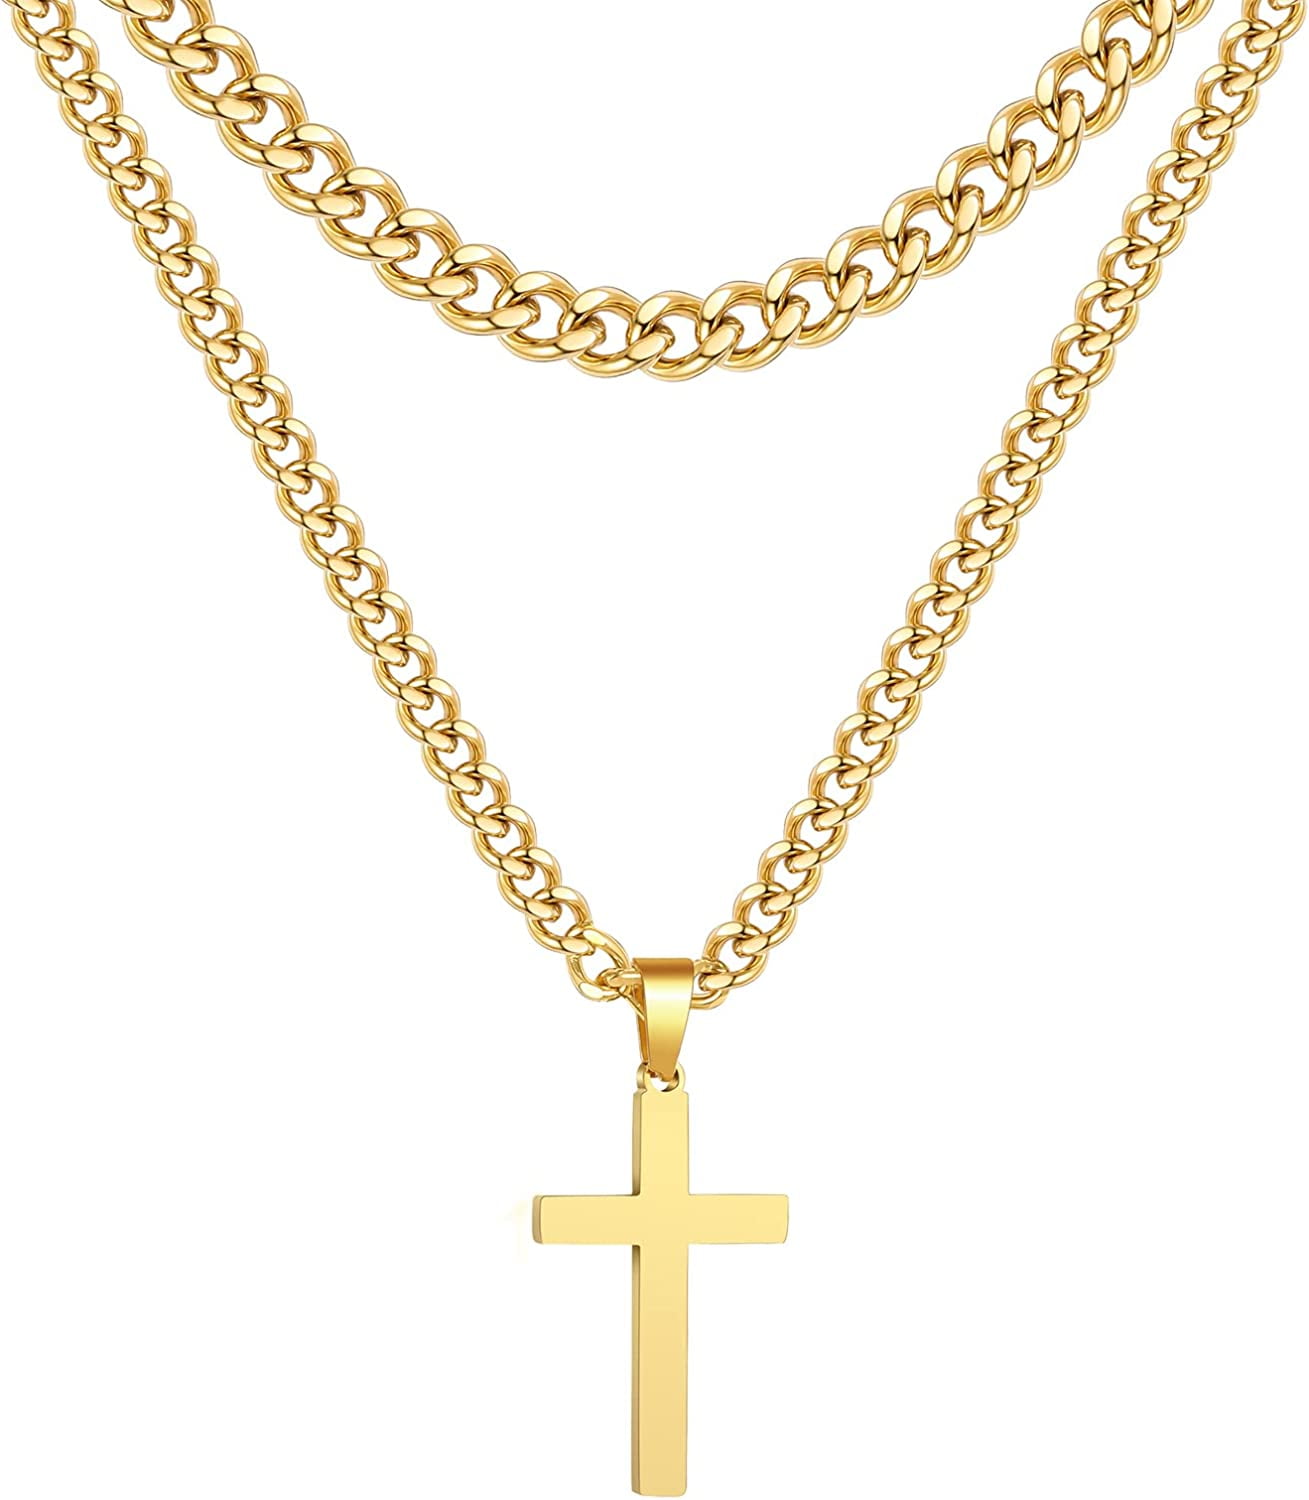 Amazon.com: Jewel Zone US Double Chain Cross Pendant Necklace 14k White  Gold Over Sterling Silver : Clothing, Shoes & Jewelry